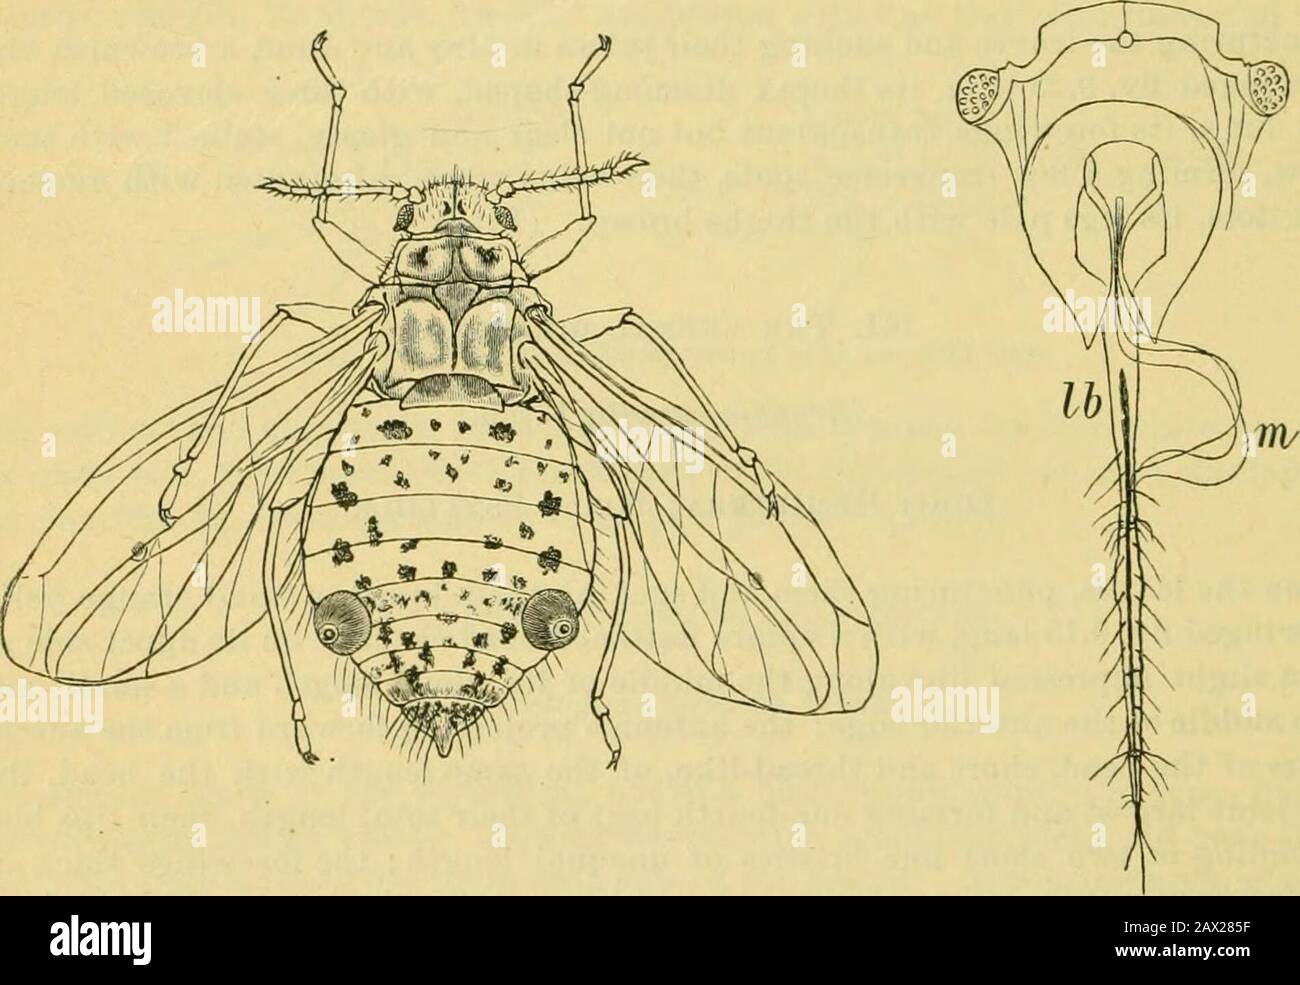 Fifth report of the United States Entomological Commission, being a revised and enlarged edition of Bulletin no7, on insects injurious to forest and shade trees . Fig. 273.—Pine Lachnus. A head and beak, lb labrum, m mandibles; a, larva, male; 6, female, bodyfilled with eggs; c, papa (yellowish); g, odoriferous gland; h, orifice of the honey-tube —GisslerdeJ. 143. The white pine schizoneura. Schizoneura pinicola Thomas. Order Hemiptera ; family Aphid^e. Feeding on the tender shoots of the young white pines in Illinois, their presenceindicated by slender snow-white silky webs, and usually cover Stock Photo